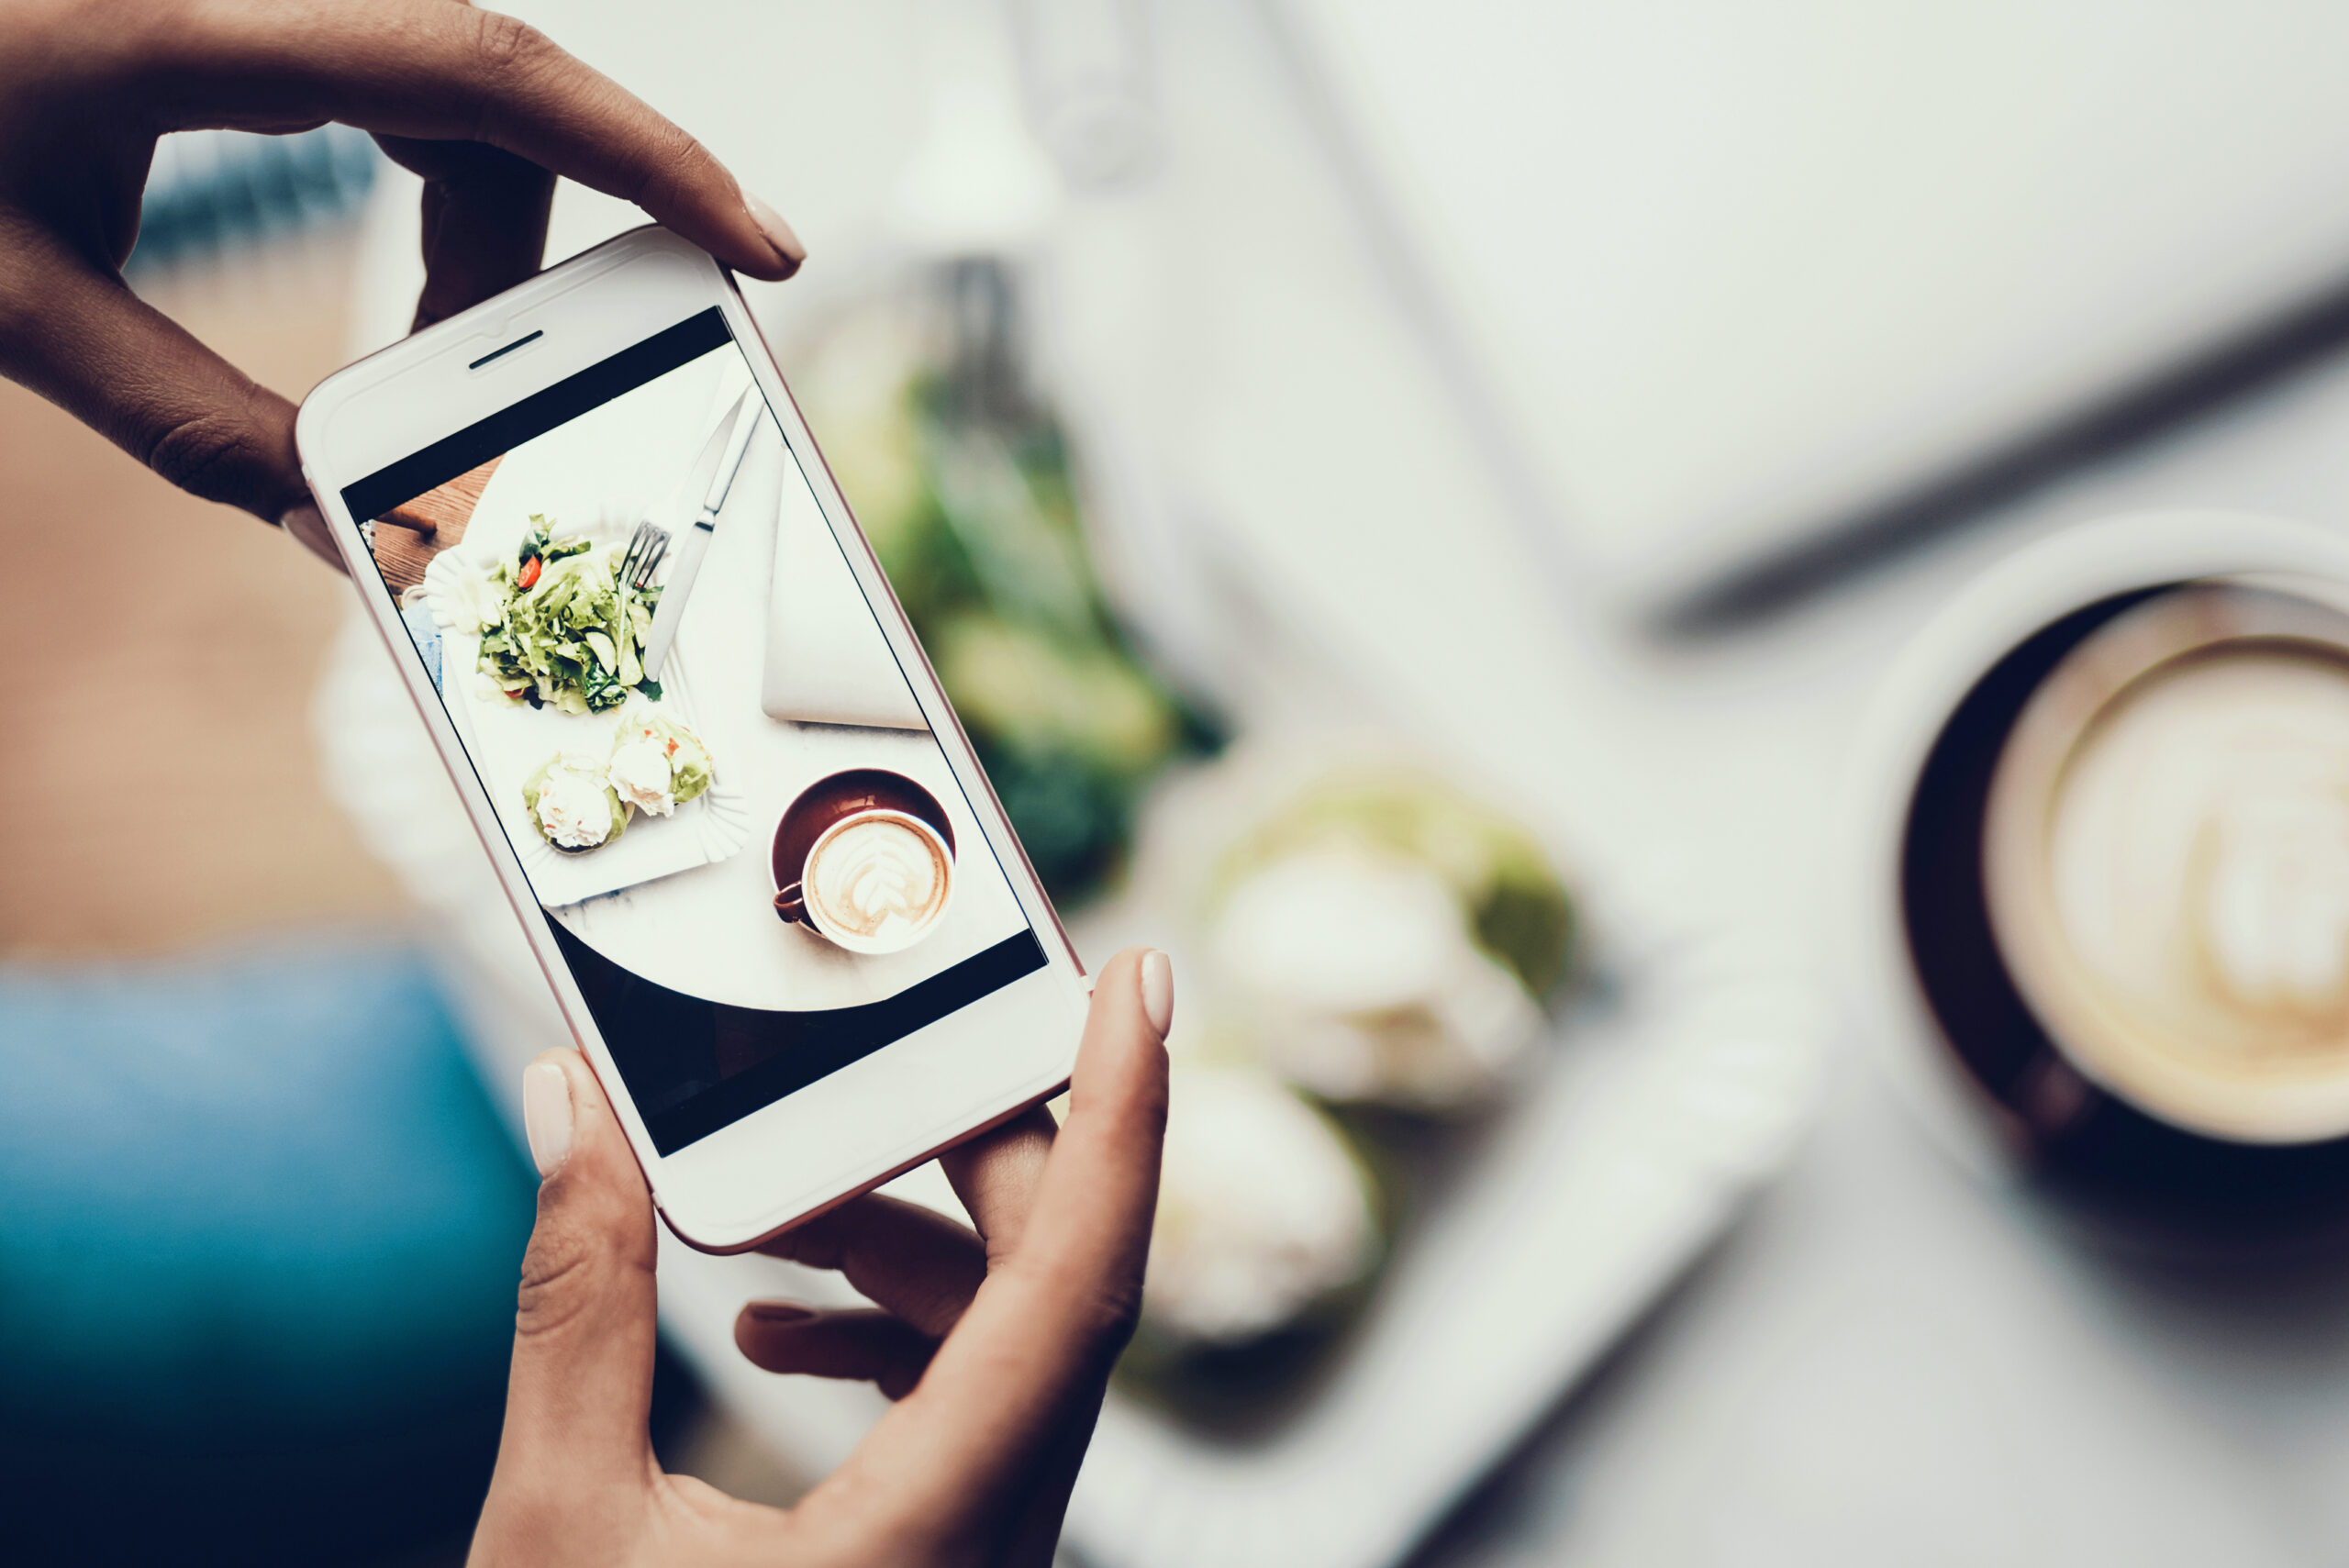 a hand holding a smartphone to take a photo of the food on the table